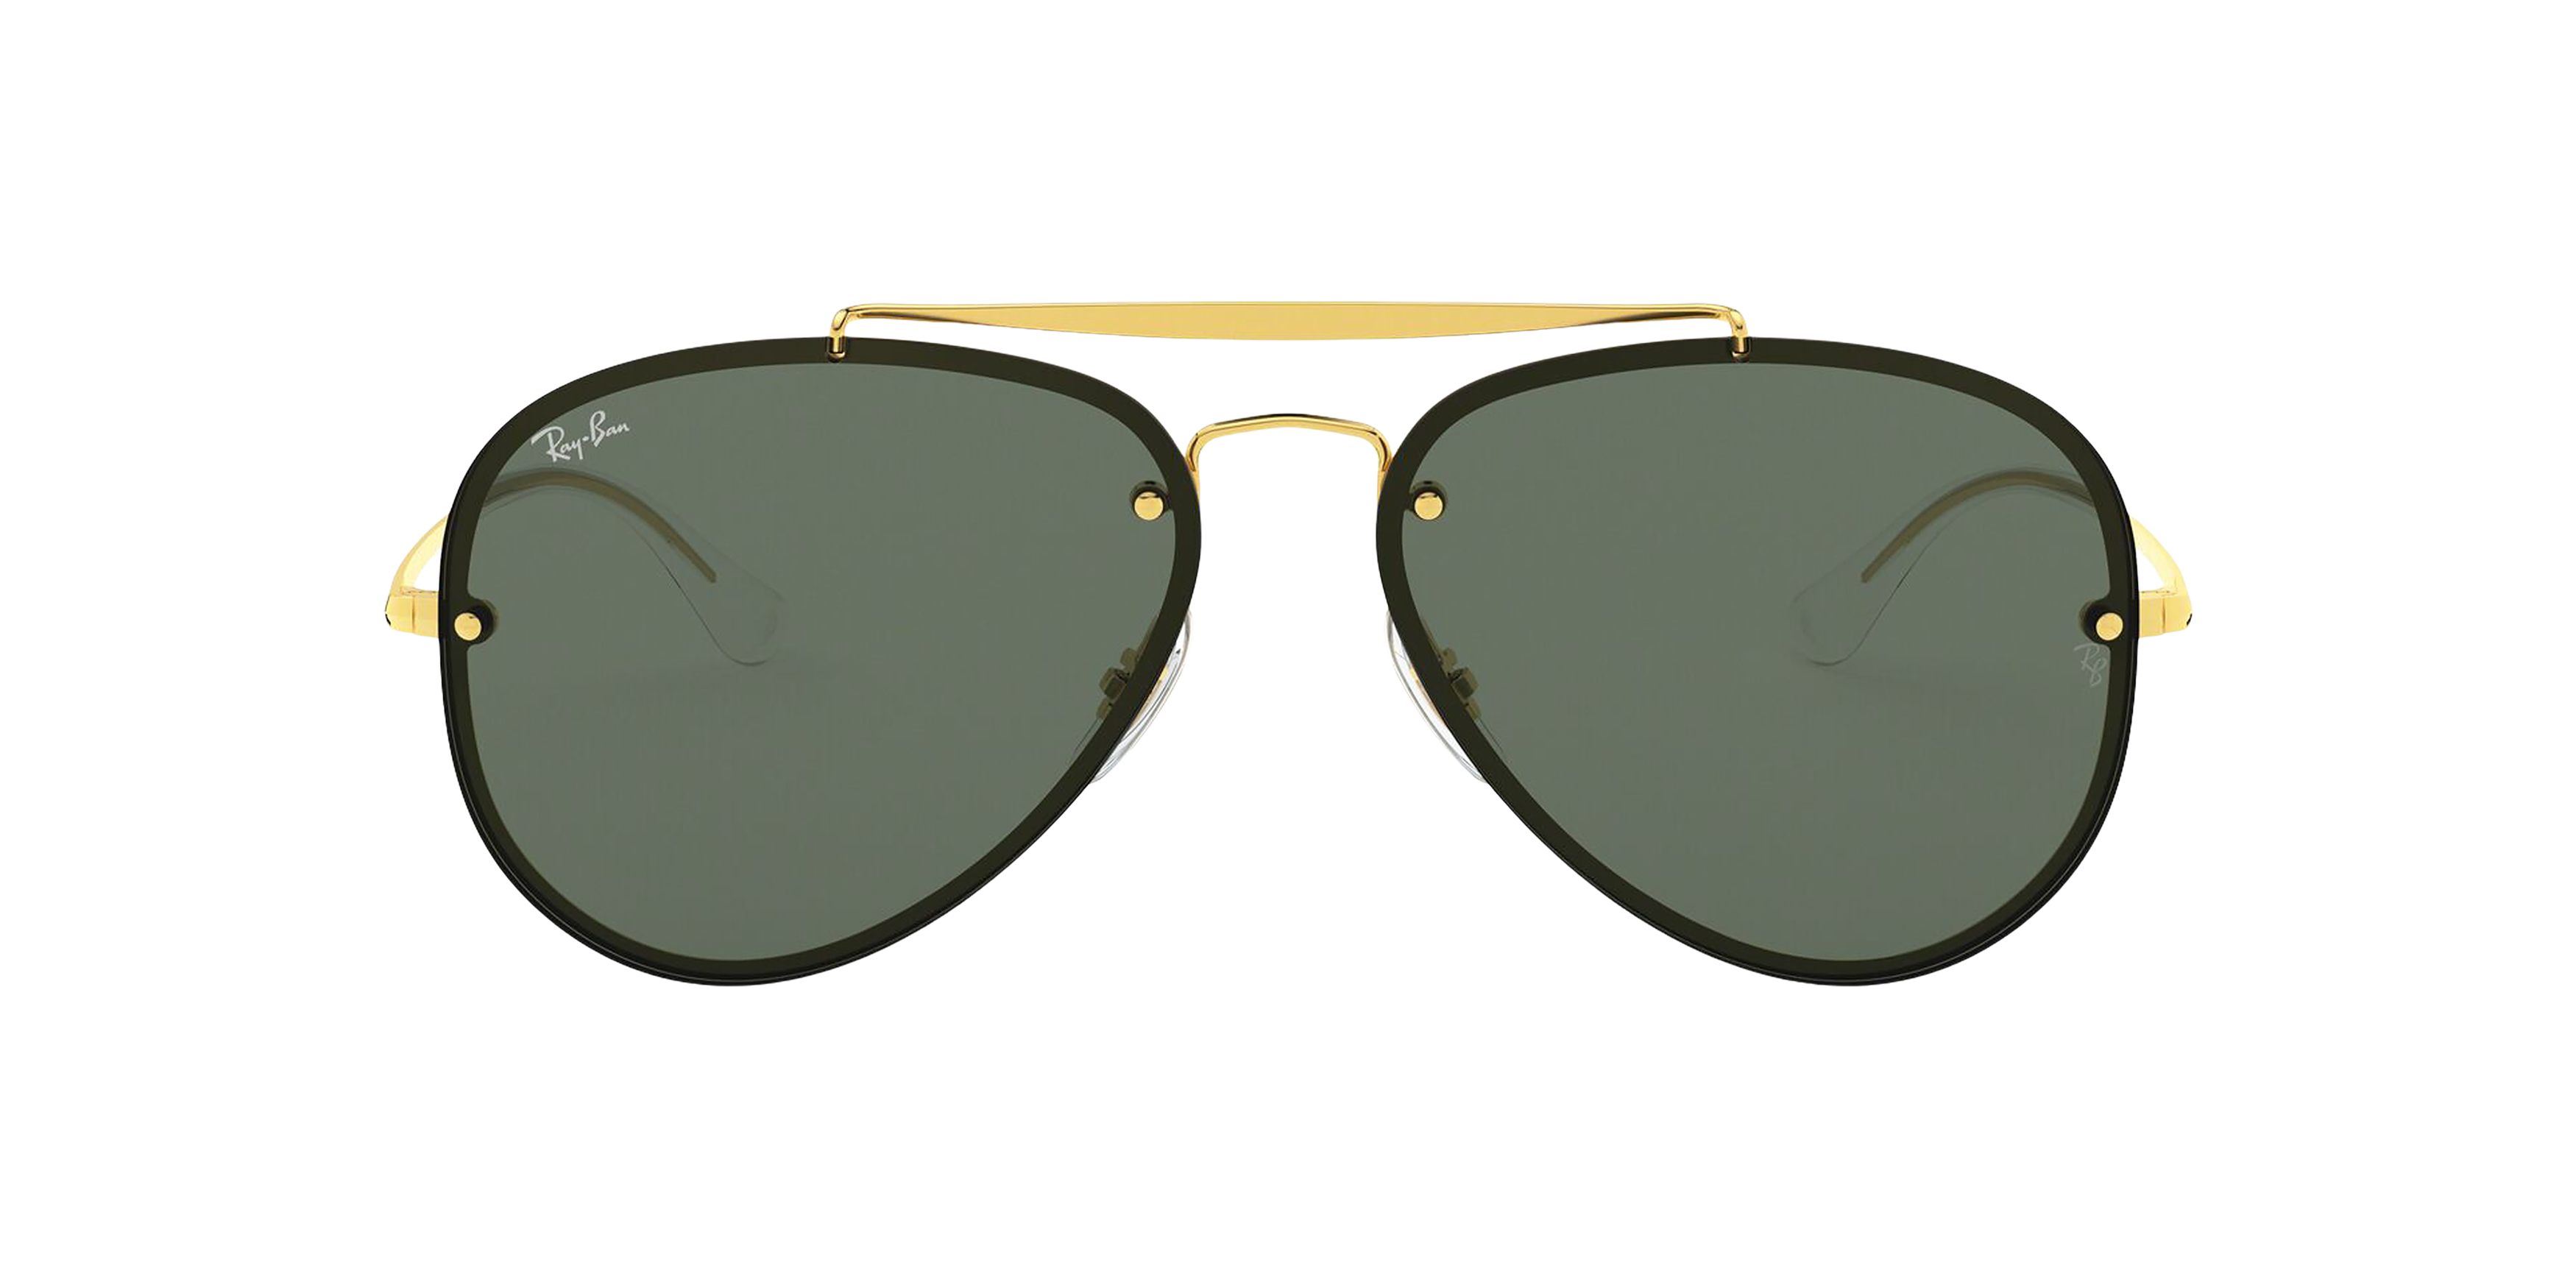 [products.image.front] Ray-Ban Blaze Aviator RB3584N 905071